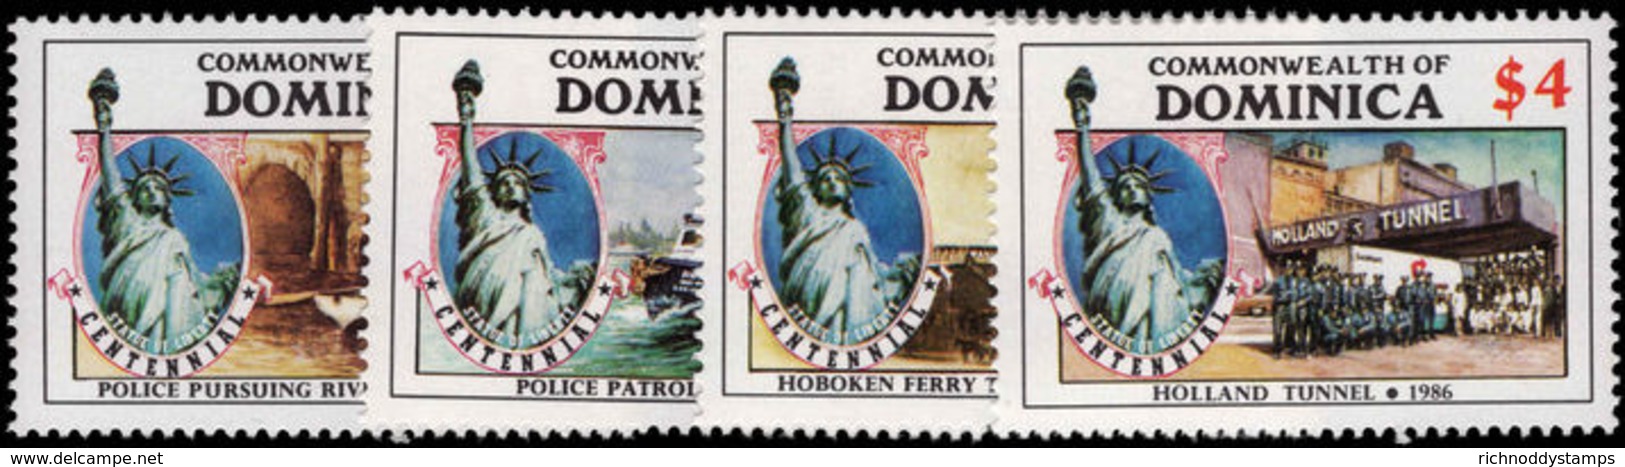 Dominica 1986 Statue Of Liberty Unmounted Mint. - Dominica (1978-...)